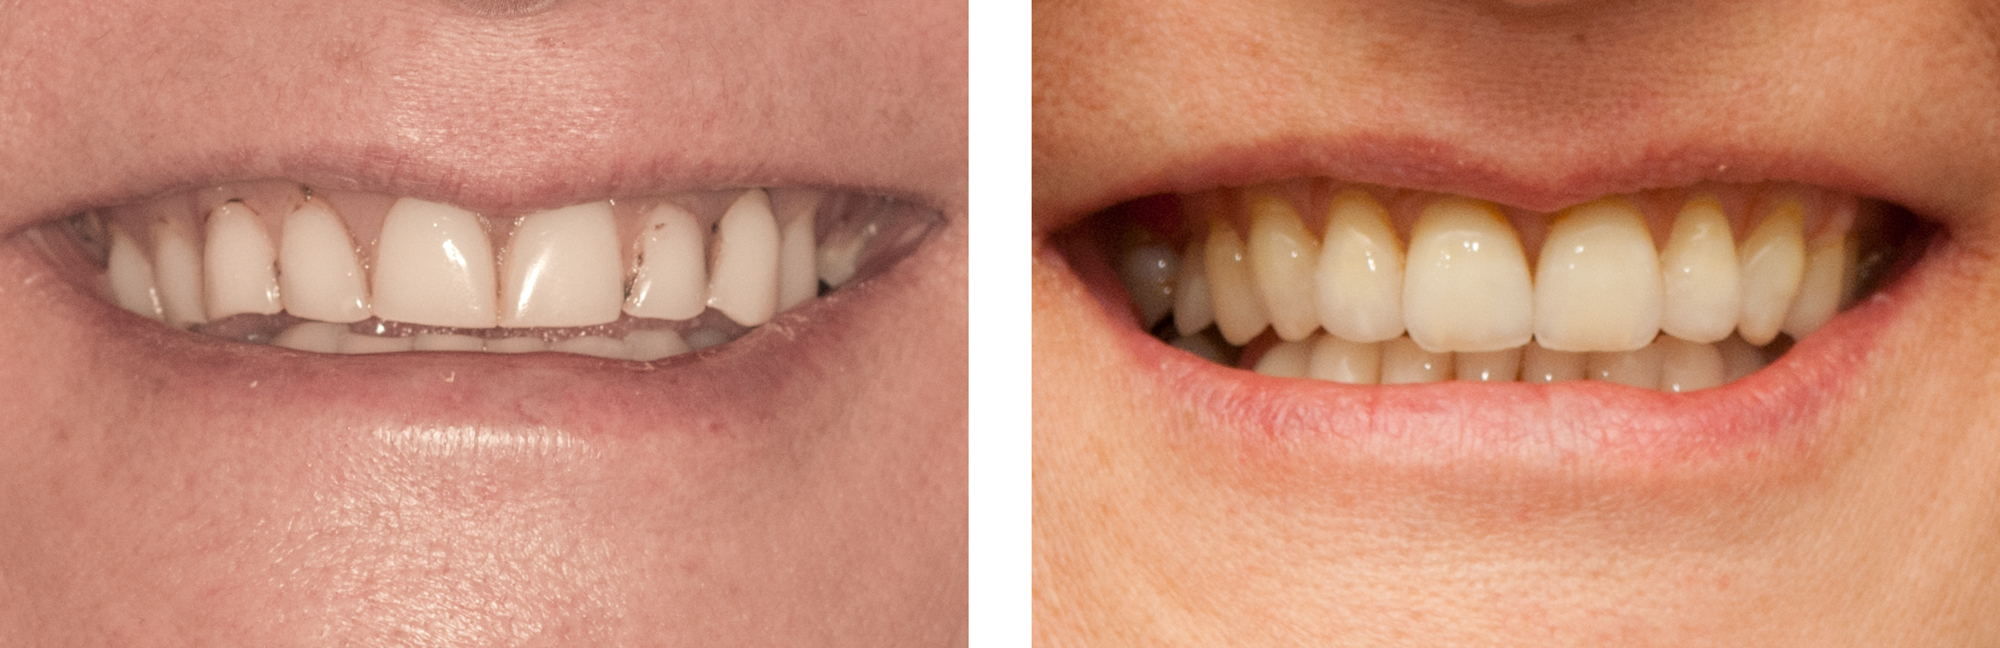 Before--After-A-Full-Upper-denture-by-Ron-Winter-of-Fabulous-Teeth--Seaside-Dental-Laboratory-Takapuna-Auckland-New-Zealand.jpg